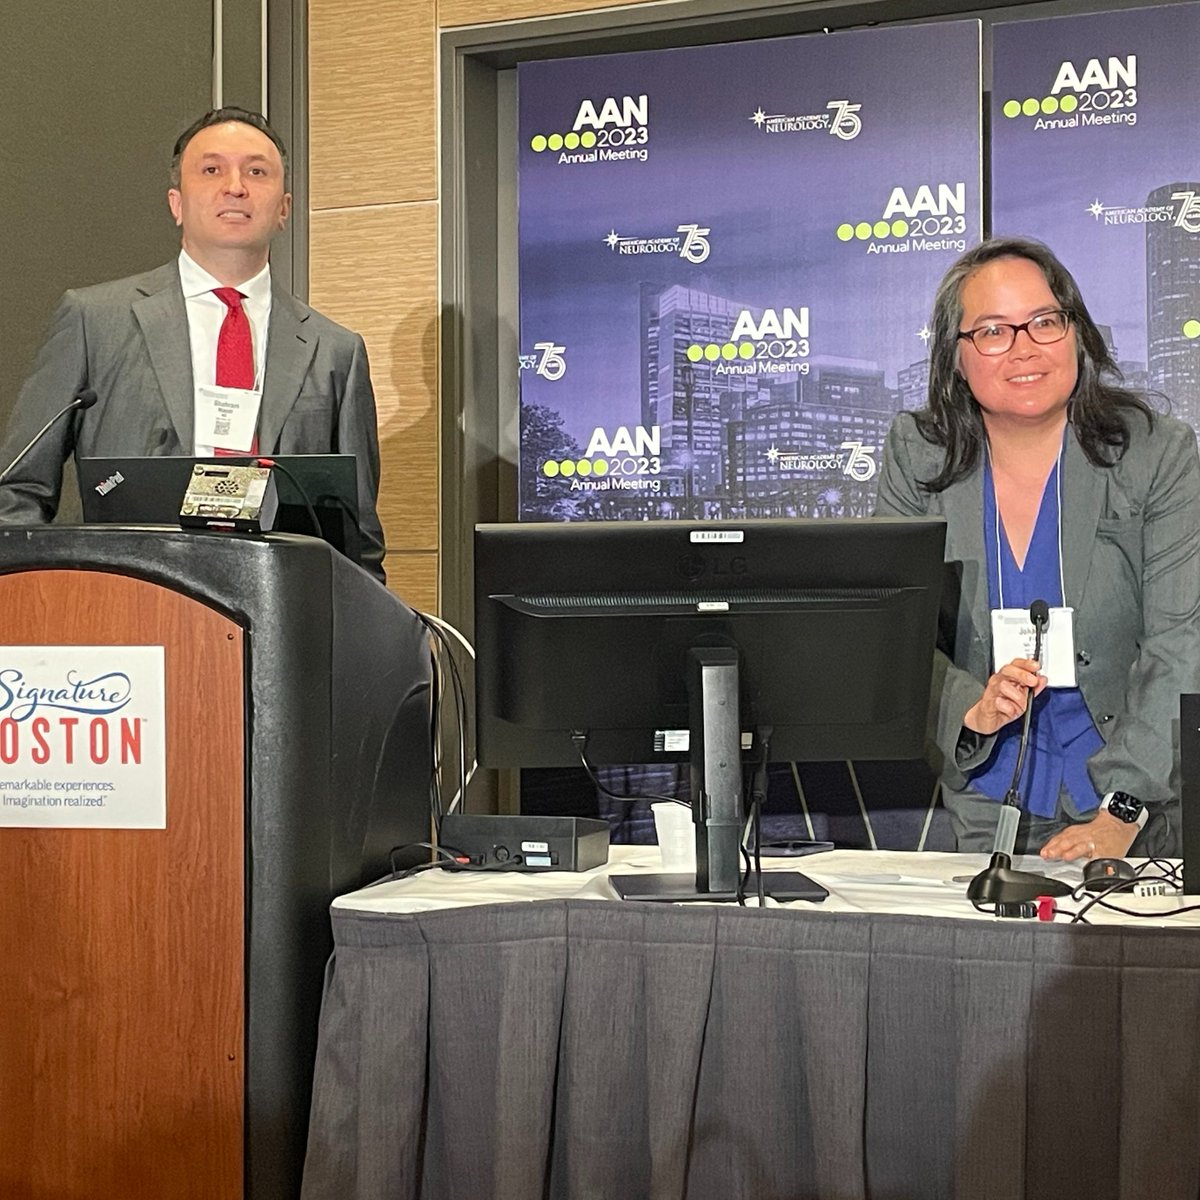 Our cerebrovascular experts overlap at #AANAM / #AANS2023! @johannatfifi, @MajidiShahram & @shapiro88 (with @NguyenThanhMD) lead a great session, research & eposters on #stroke, #thrombectomy, #aneurysms, #VoGM & #BCI. @AANSNeuro @AANmember @neurosurgery #NeuroRad #AANAM2023